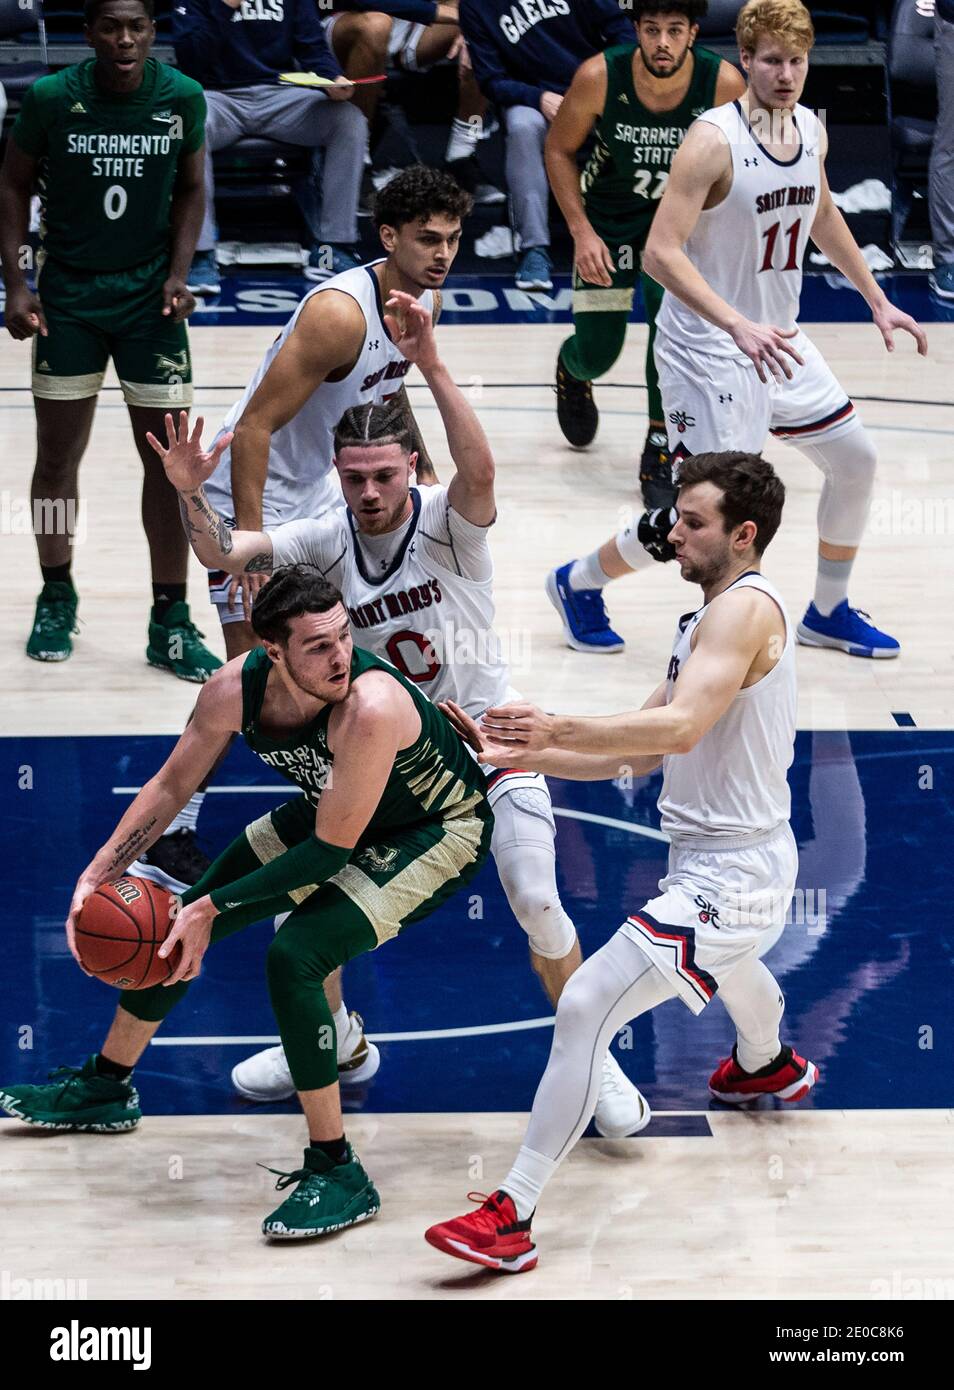 Moraga, CA U.S. 30th Dec, 2020. A. Sacramento State Hornets guard Bryce Fowler (23) looks to pass the ball during the NCAA Men's Basketball game between Sacramento State Hornets and the Saint Mary's Gaels 45-63 lost at McKeon Pavilion Moraga Calif. Thurman James/CSM/Alamy Live News Stock Photo